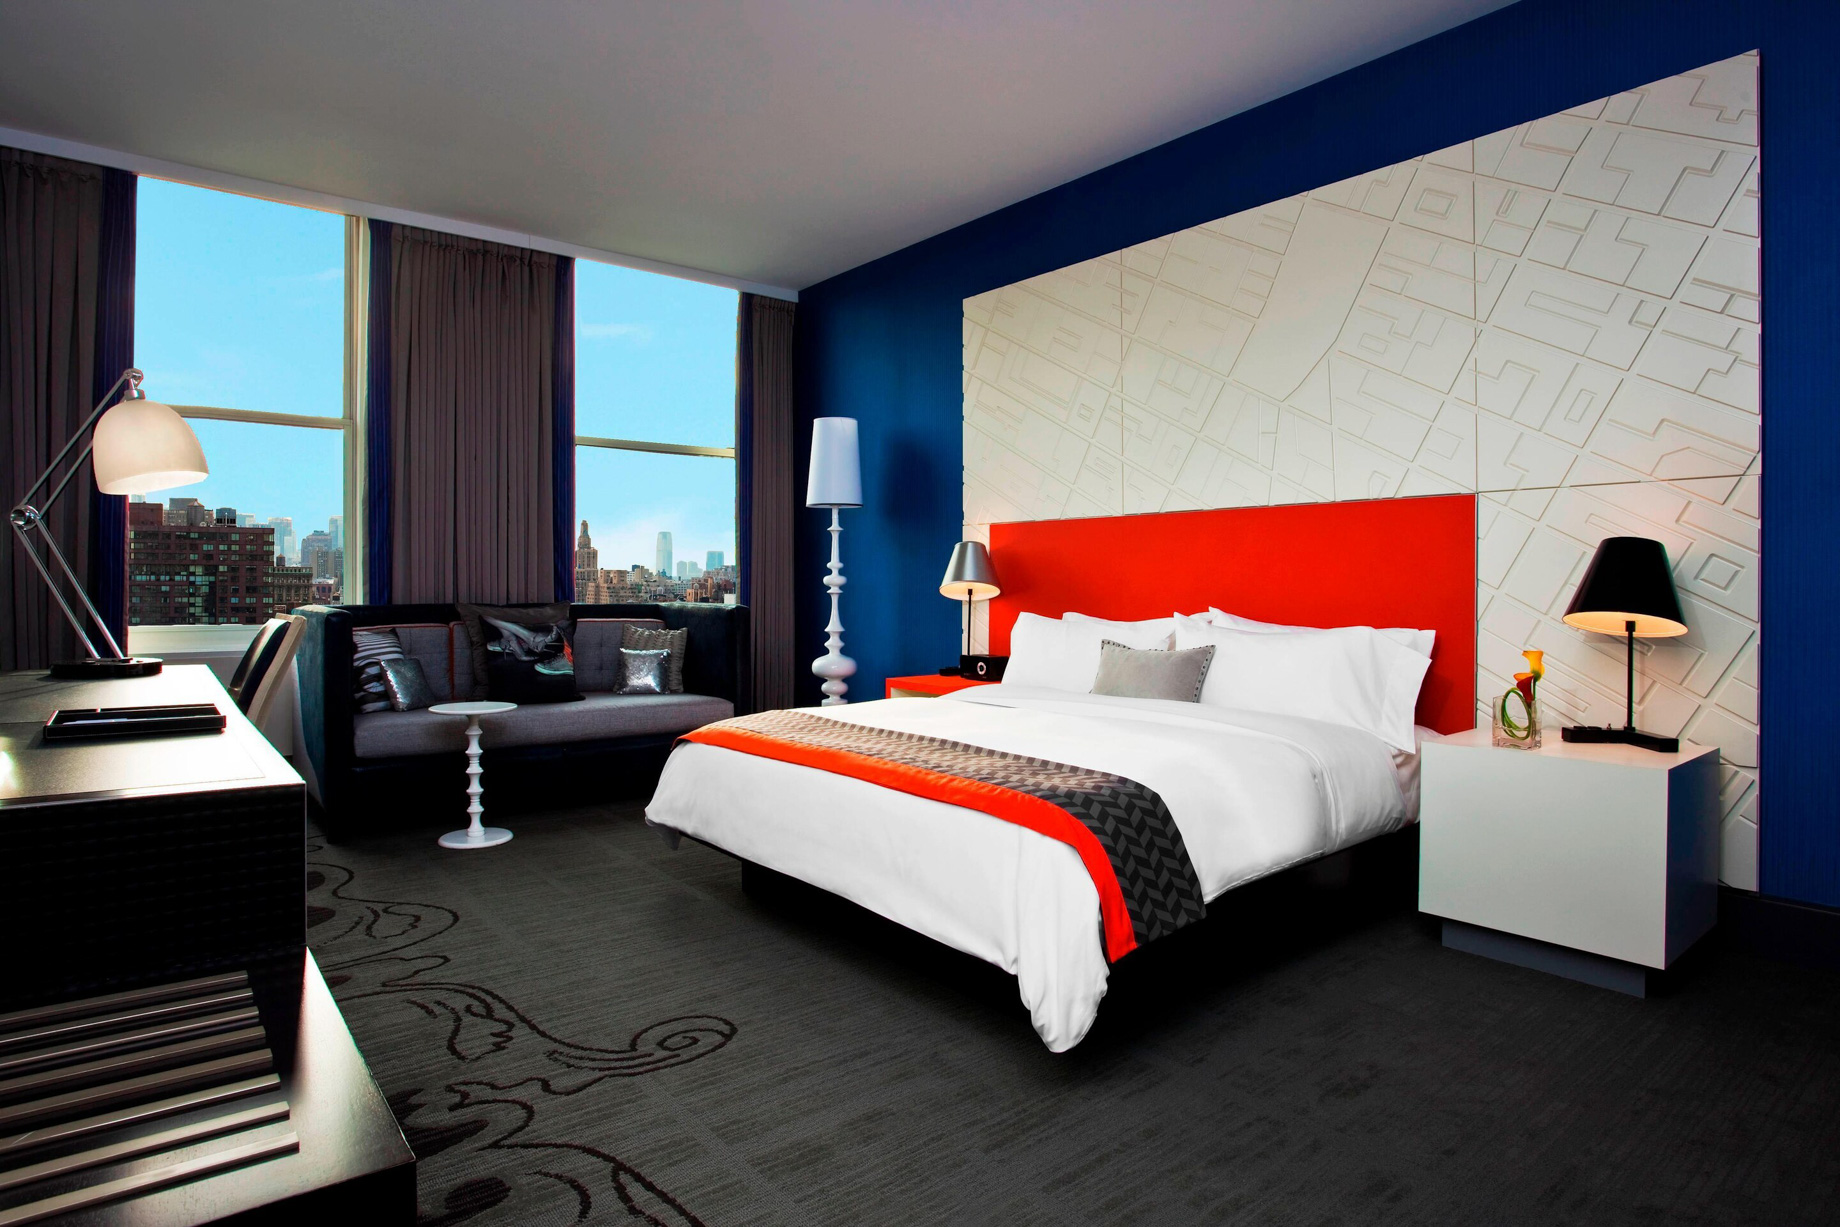 W New York Union Square Hotel – New York, NY, USA – Mega Guest Room Bed